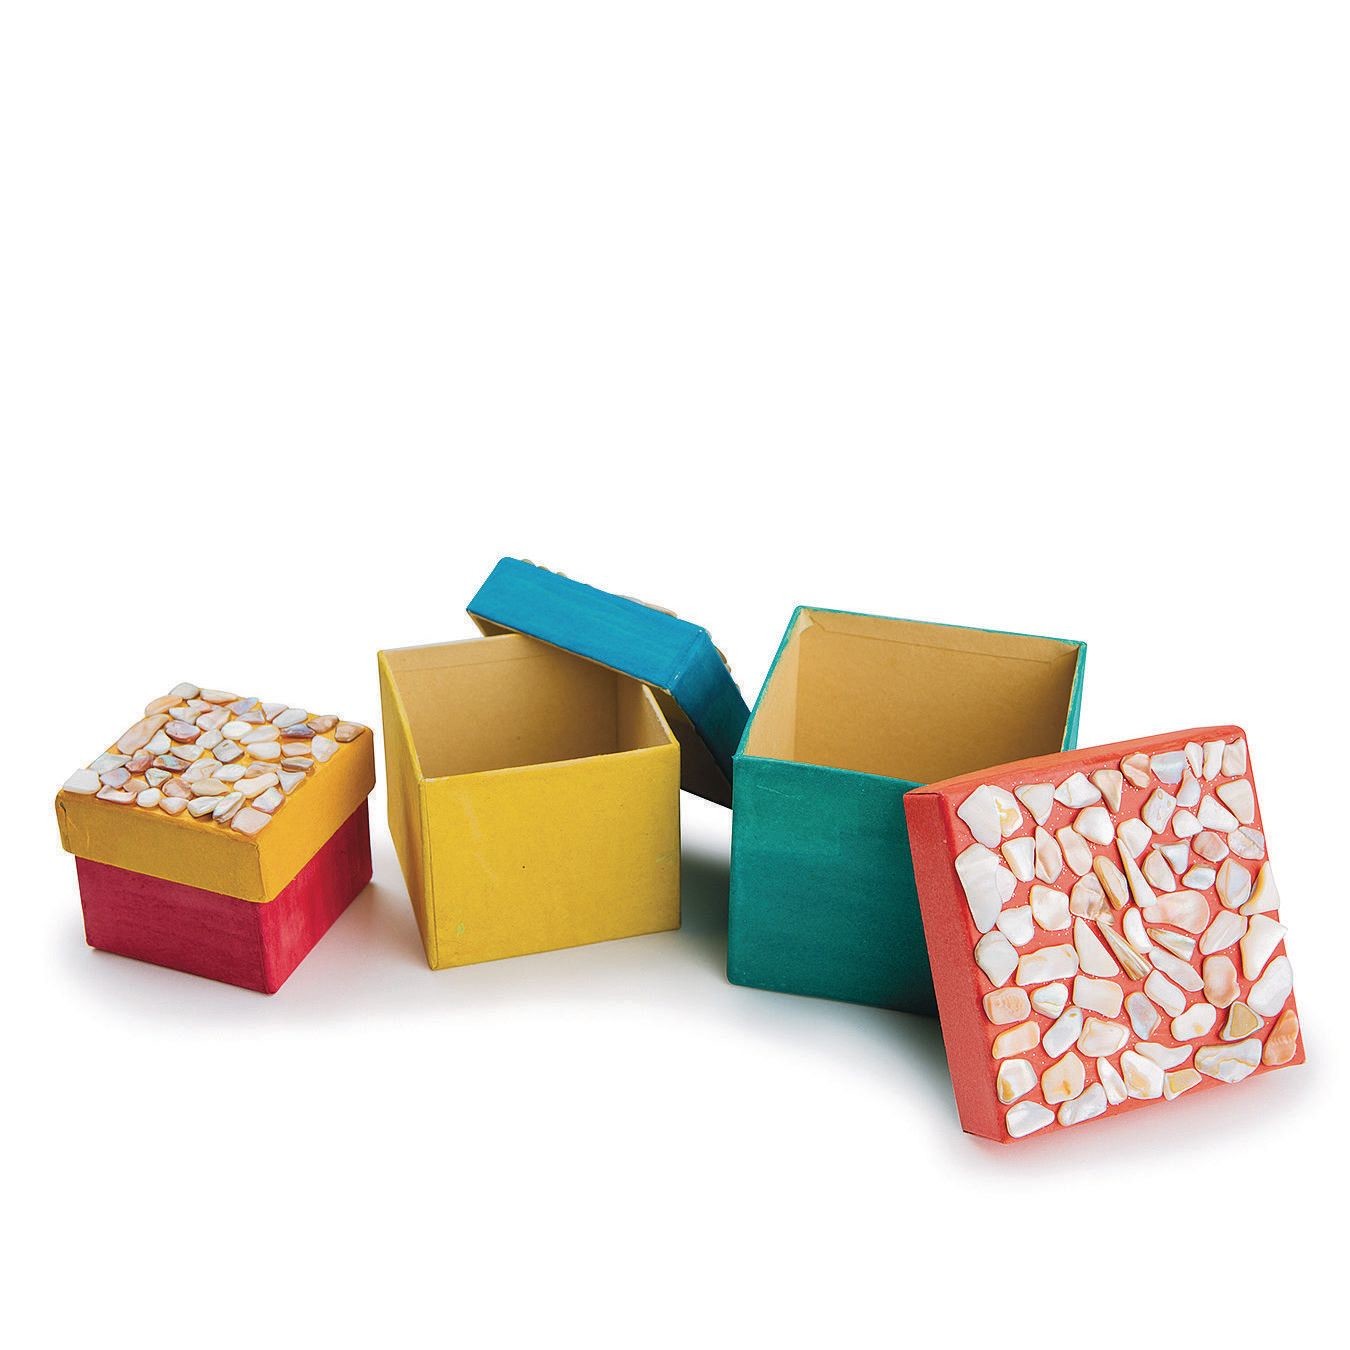 AllStellar Square Paper Mache Nesting Boxes Small Set of 3 Paper Mache Boxes  with lids for Crafting Gifts Storing Jewelry Treasure Accessories Cosmetics  Ornament and more 3 pcs Square Box